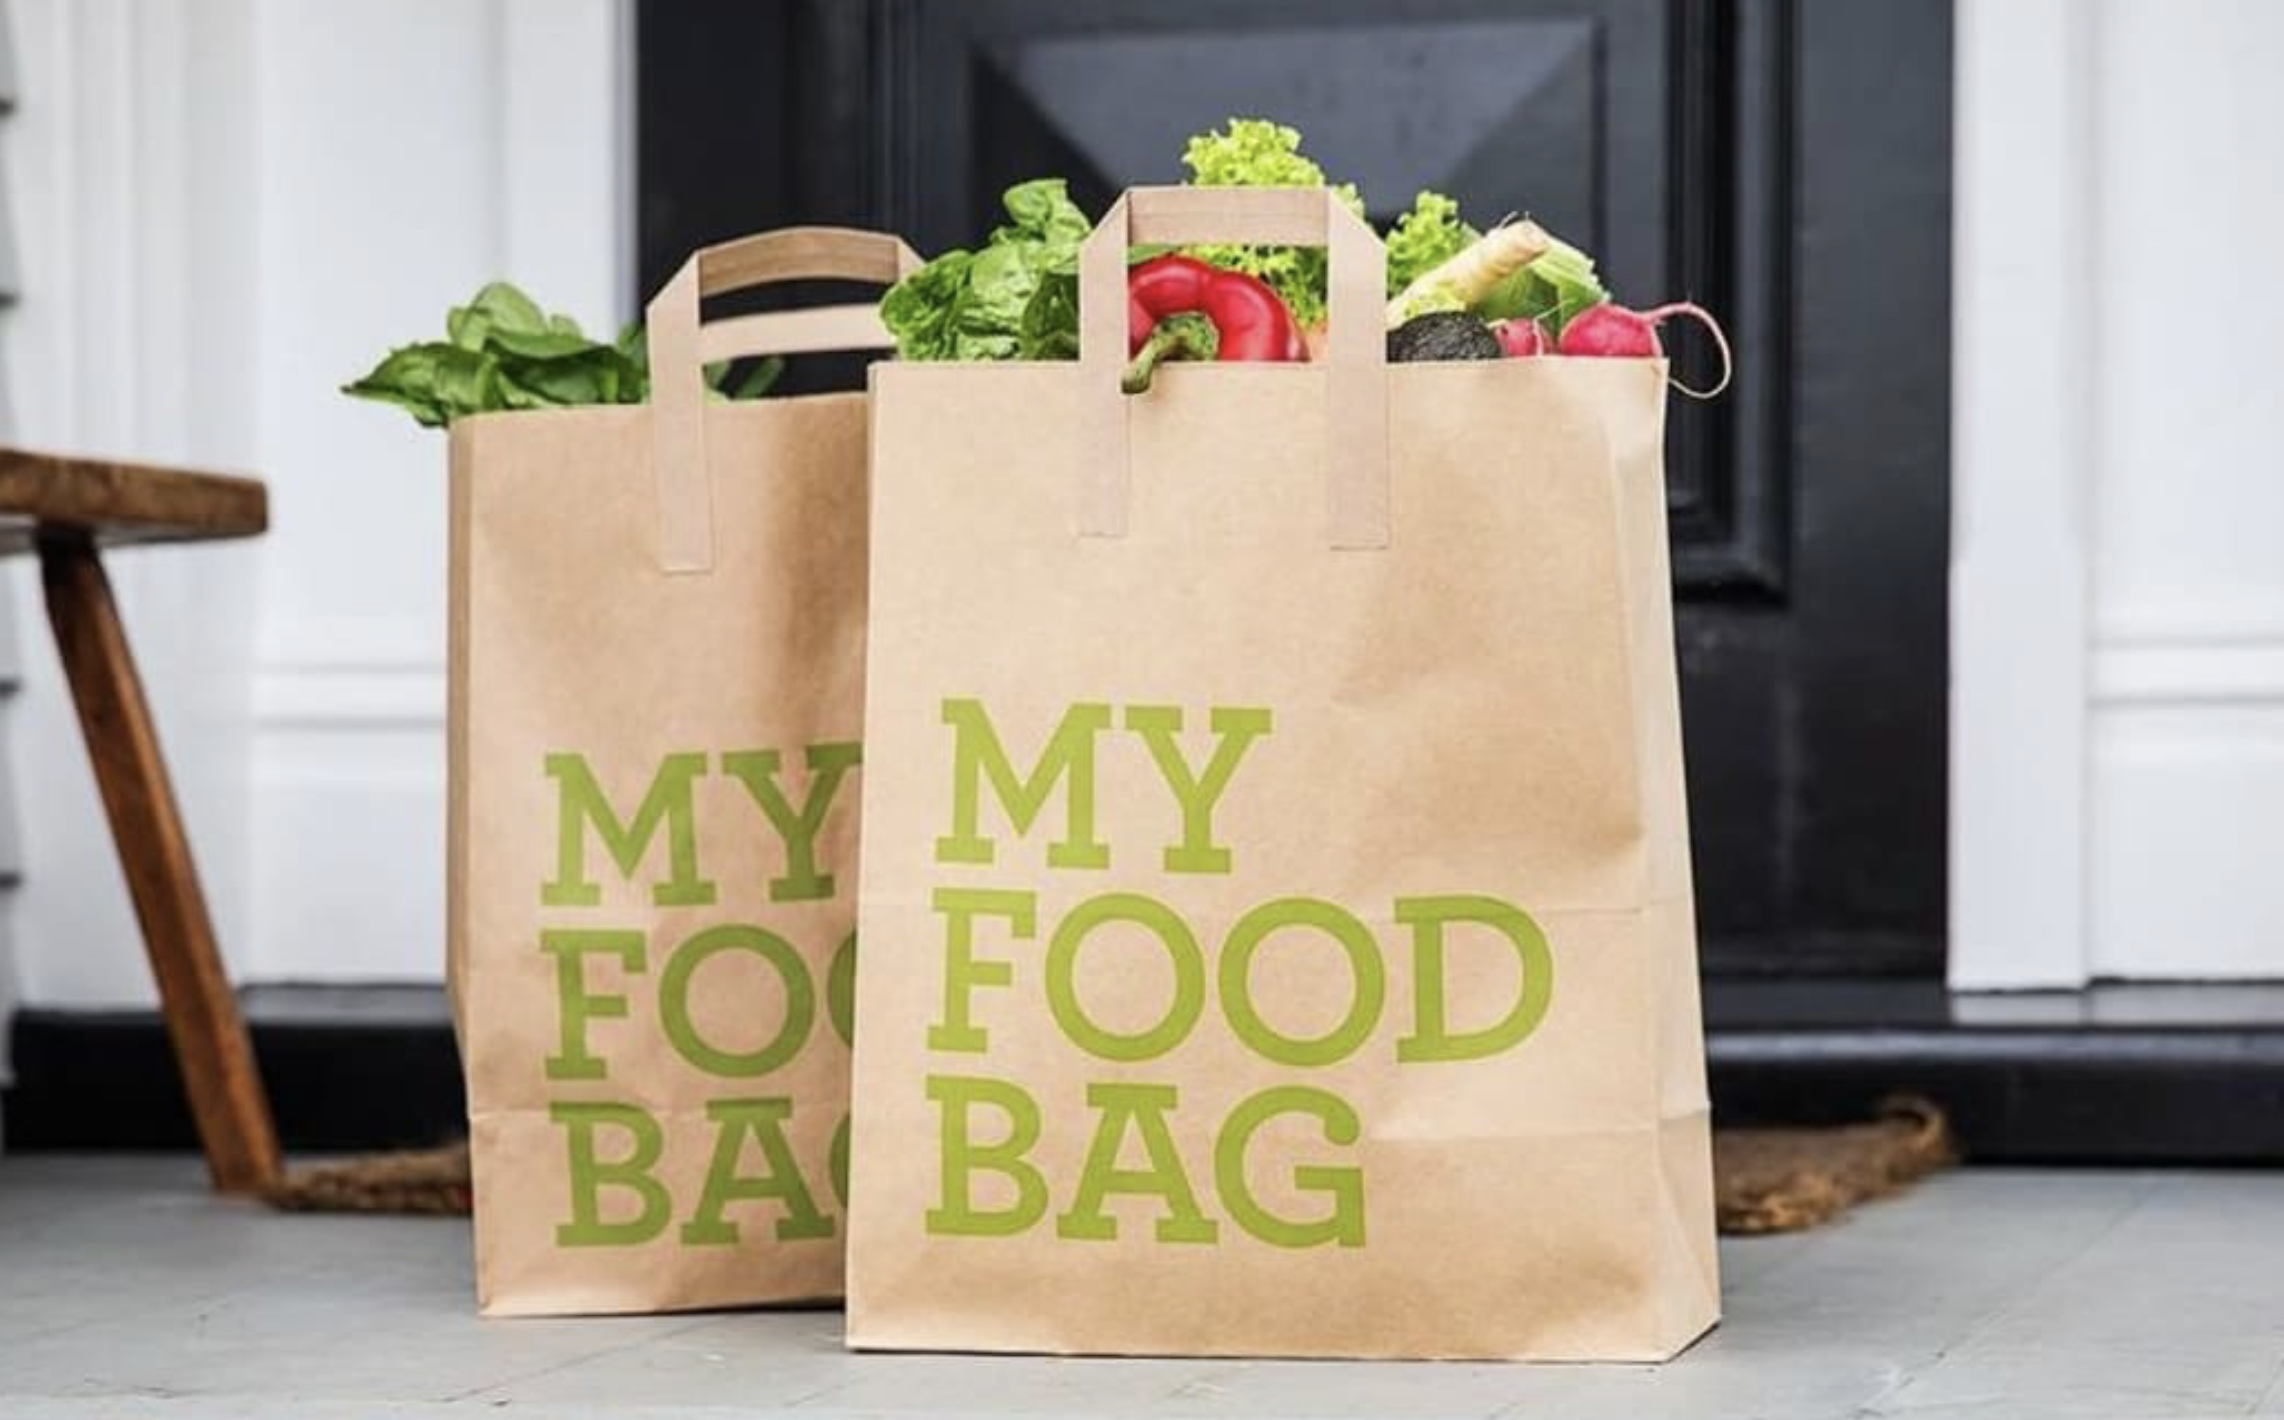 Automation and customer retention become top priorities for My Food Bag  amid declining profits - The Sentiment